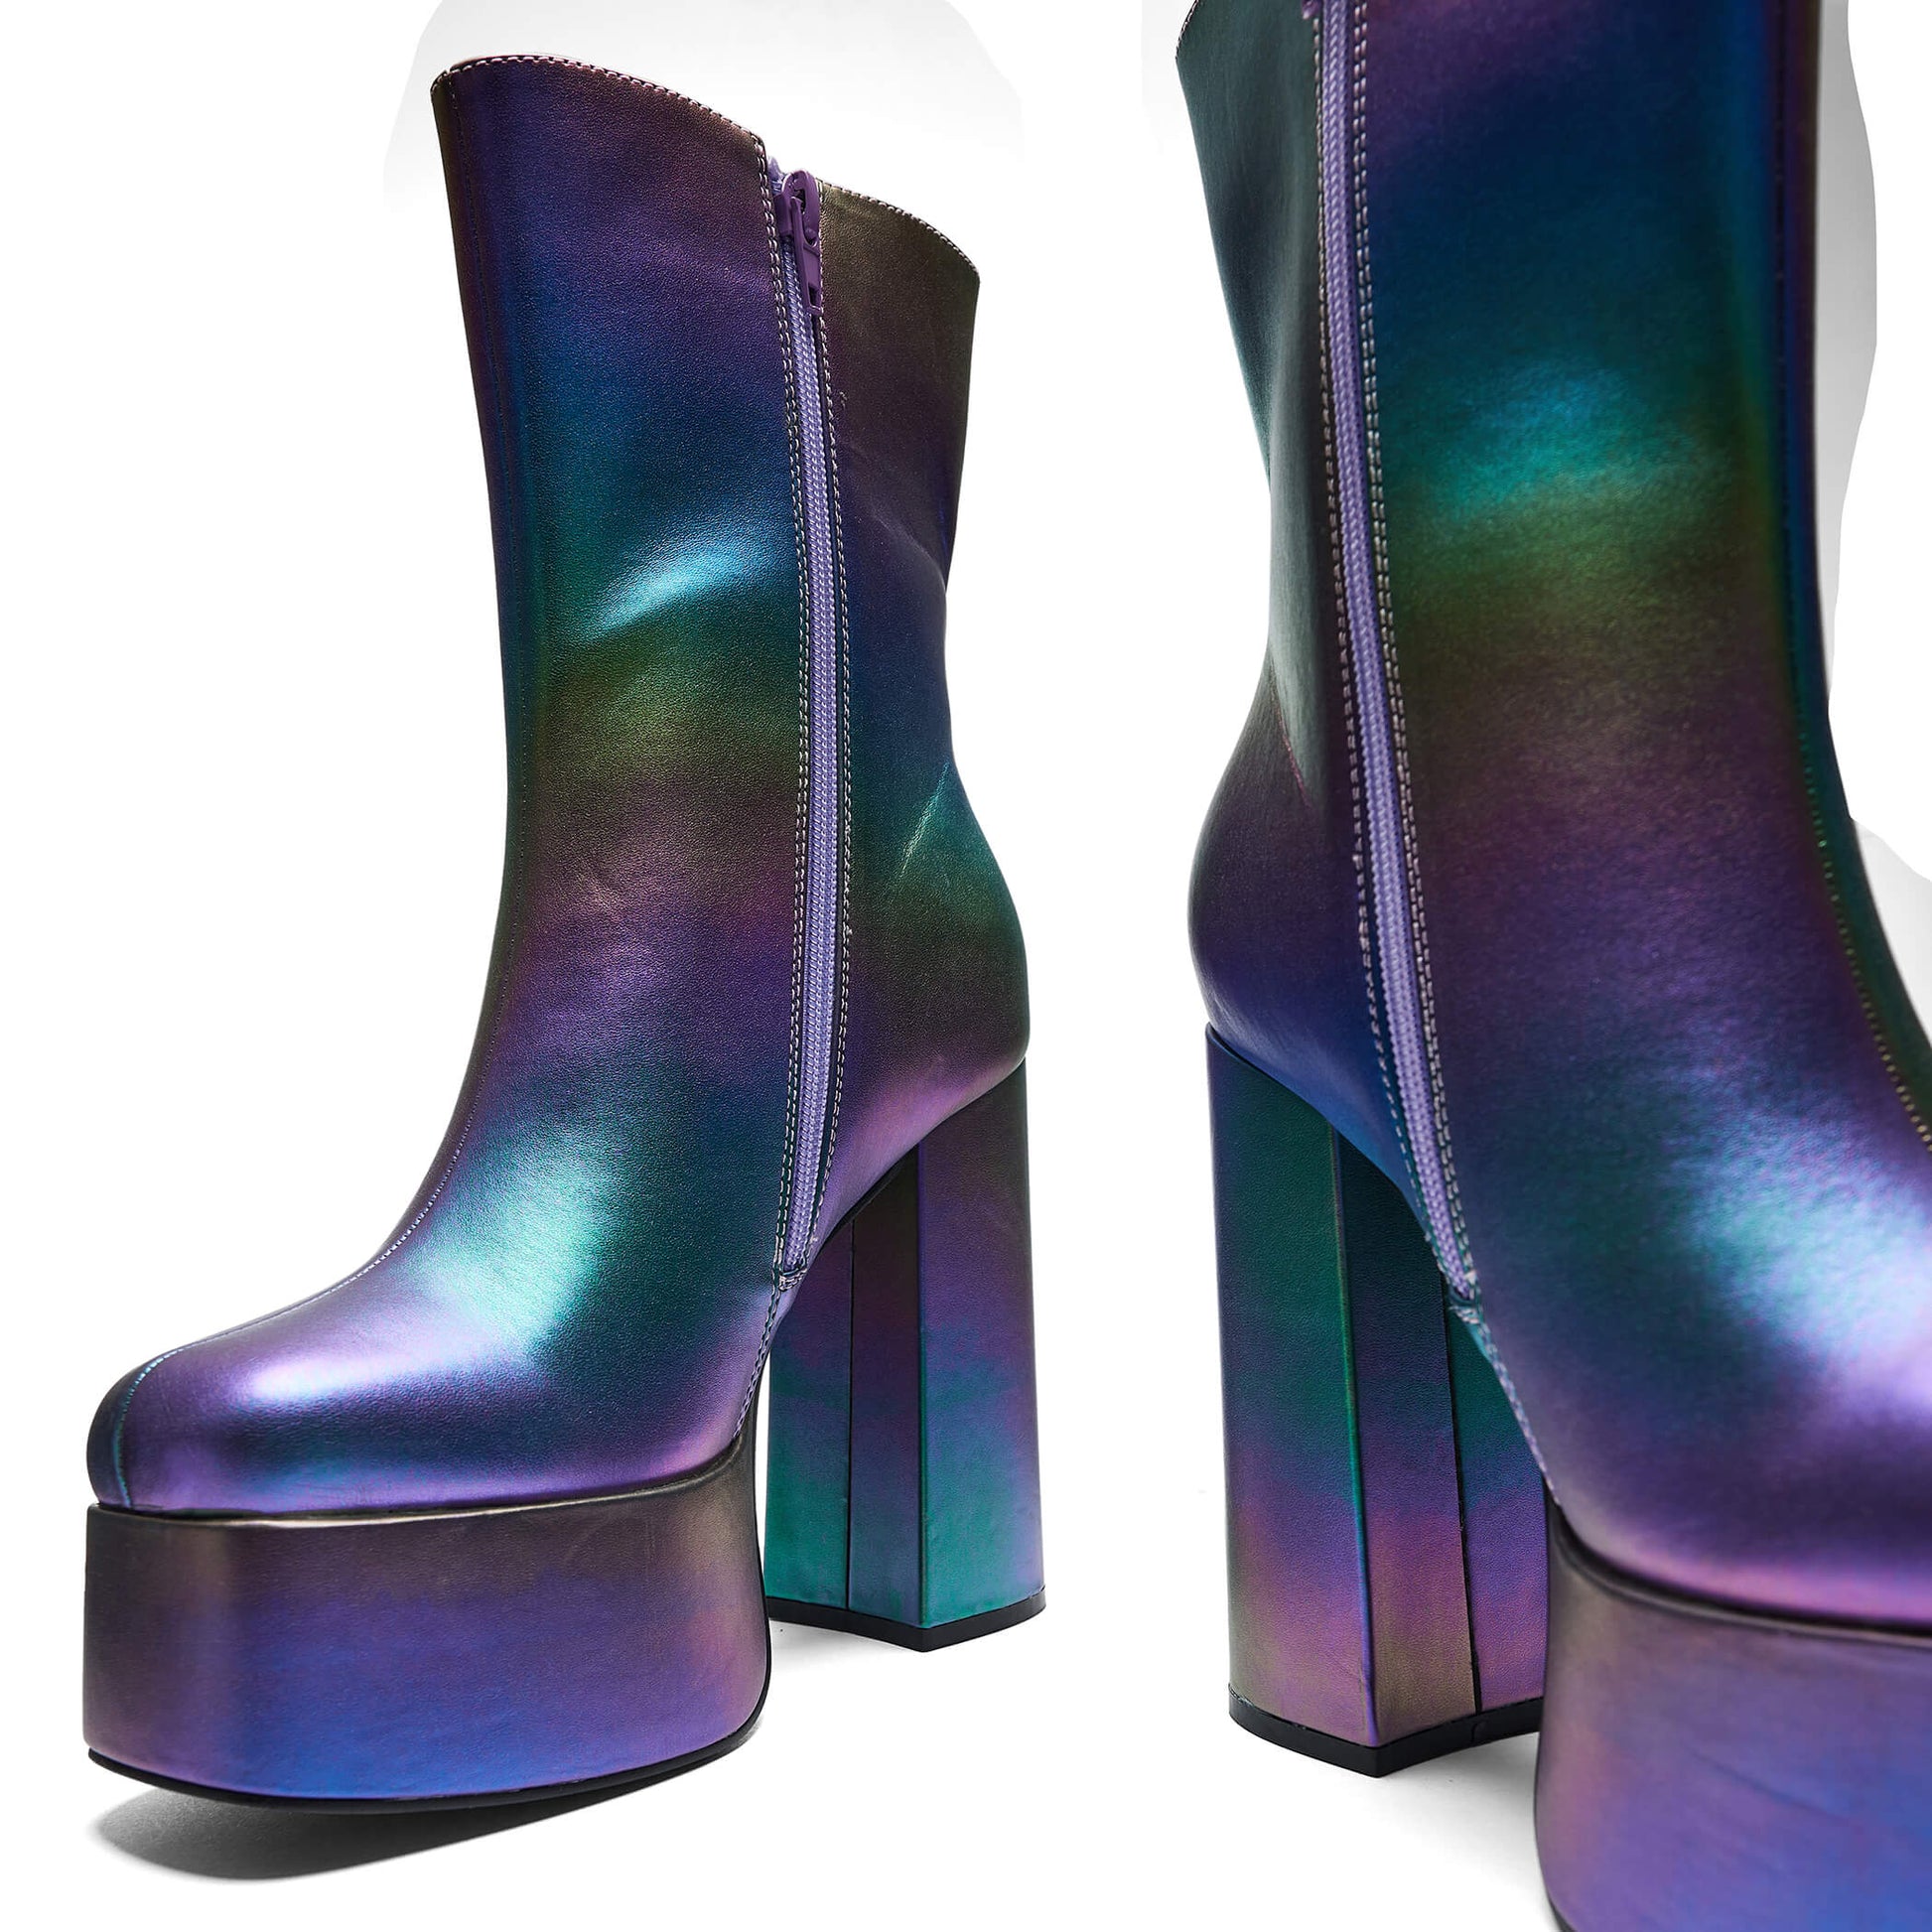 A Toiled Atmosphere Platform Boots - Neptune - Ankle Boots - KOI Footwear - Multi - Top View